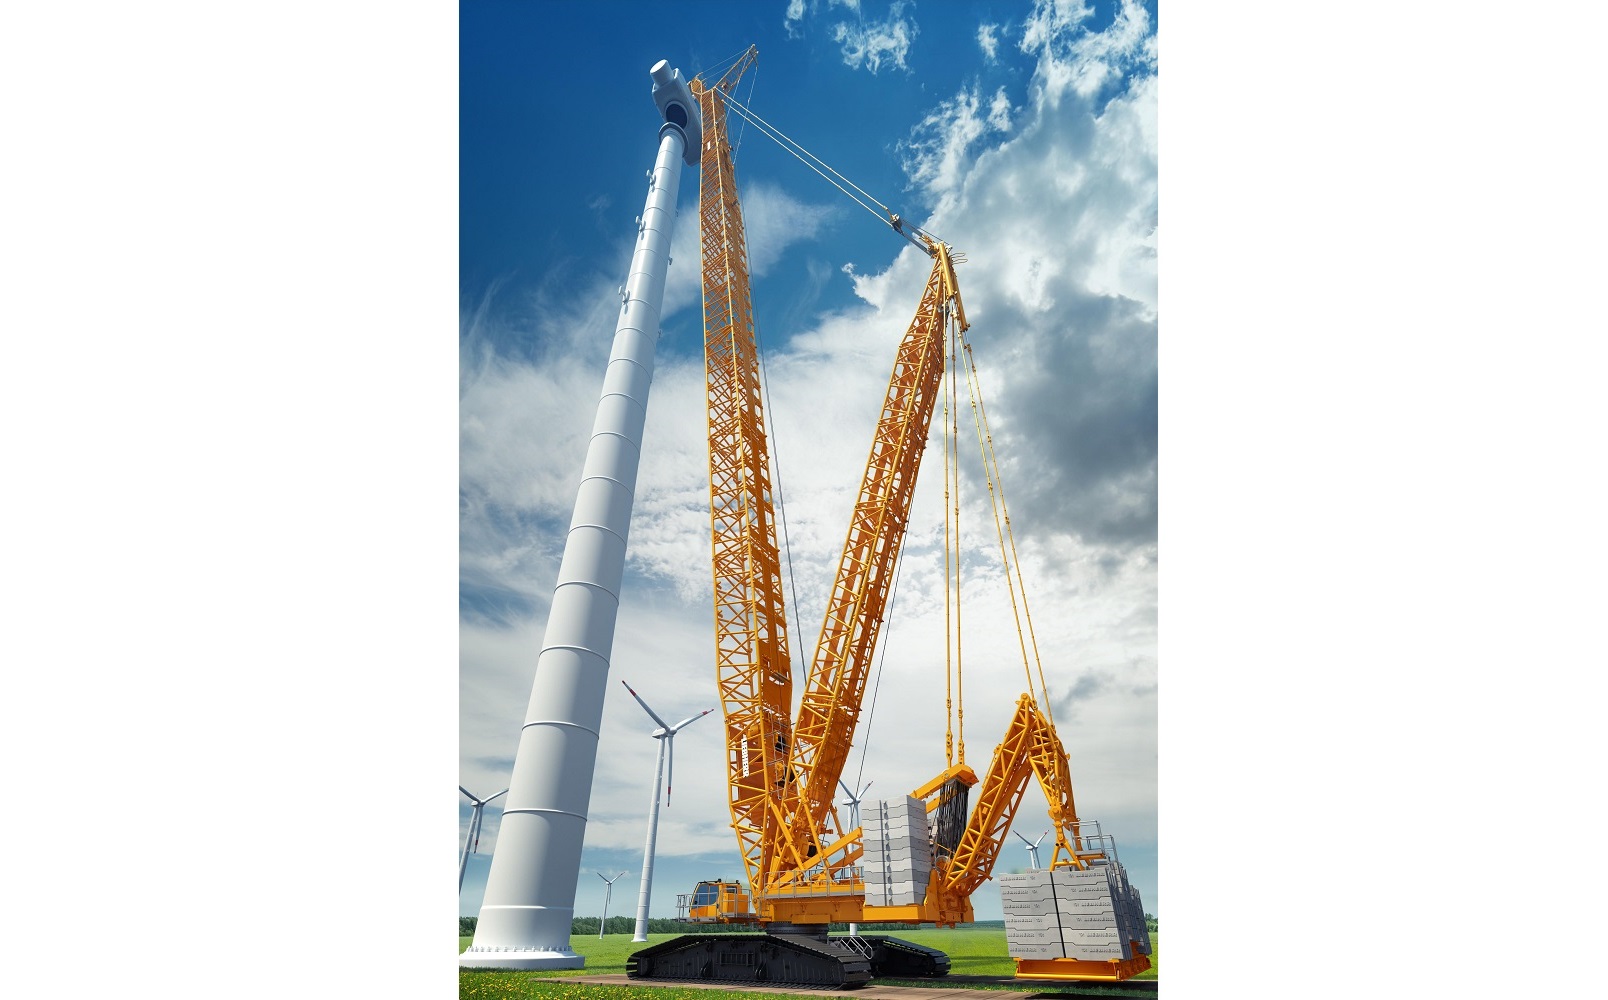 The new LR 1700-1.0 sets new standards in the crawler crane class between 600 and 750 tonnes.